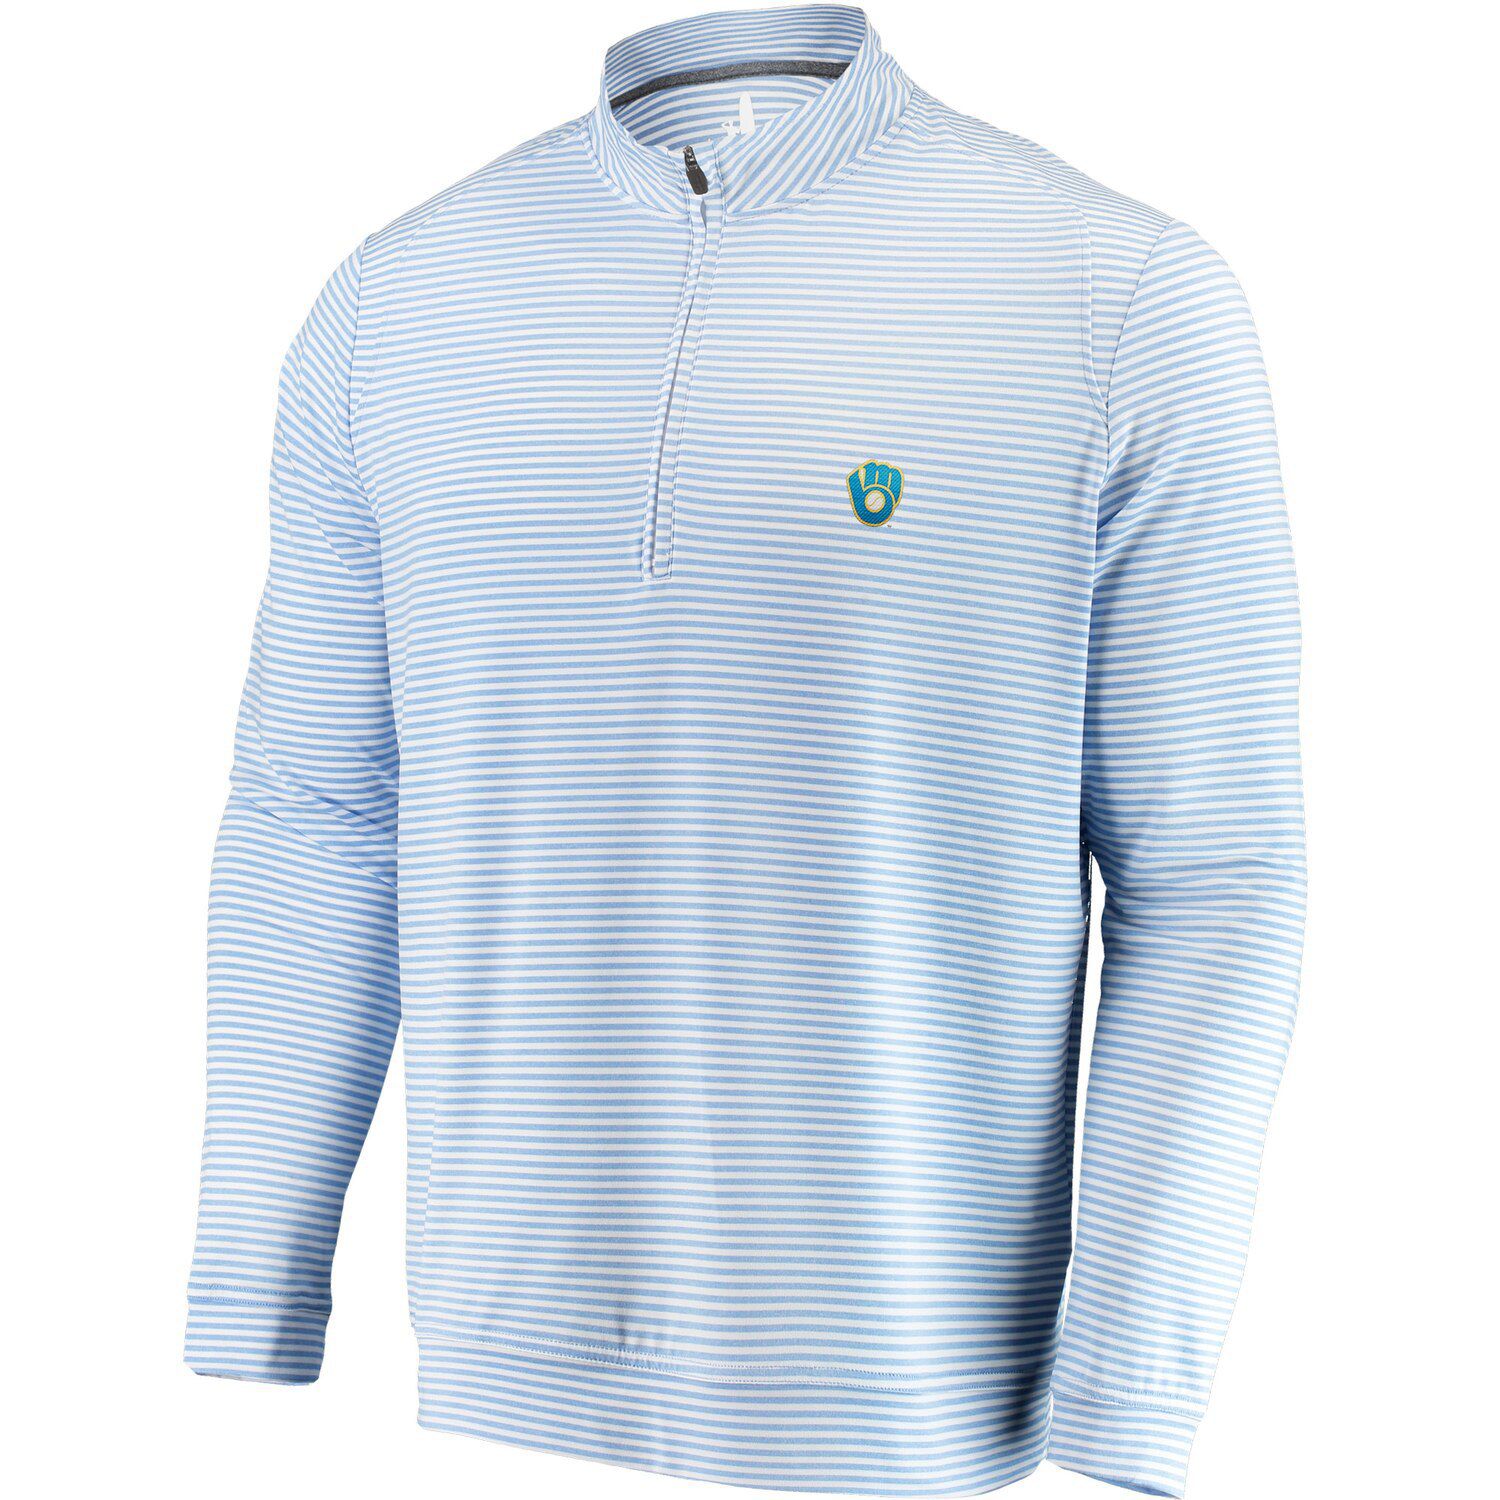 Image for Unbranded Men's johnnie-O Light Blue Milwaukee Brewers Turn Quarter-Zip Jacket at Kohl's.